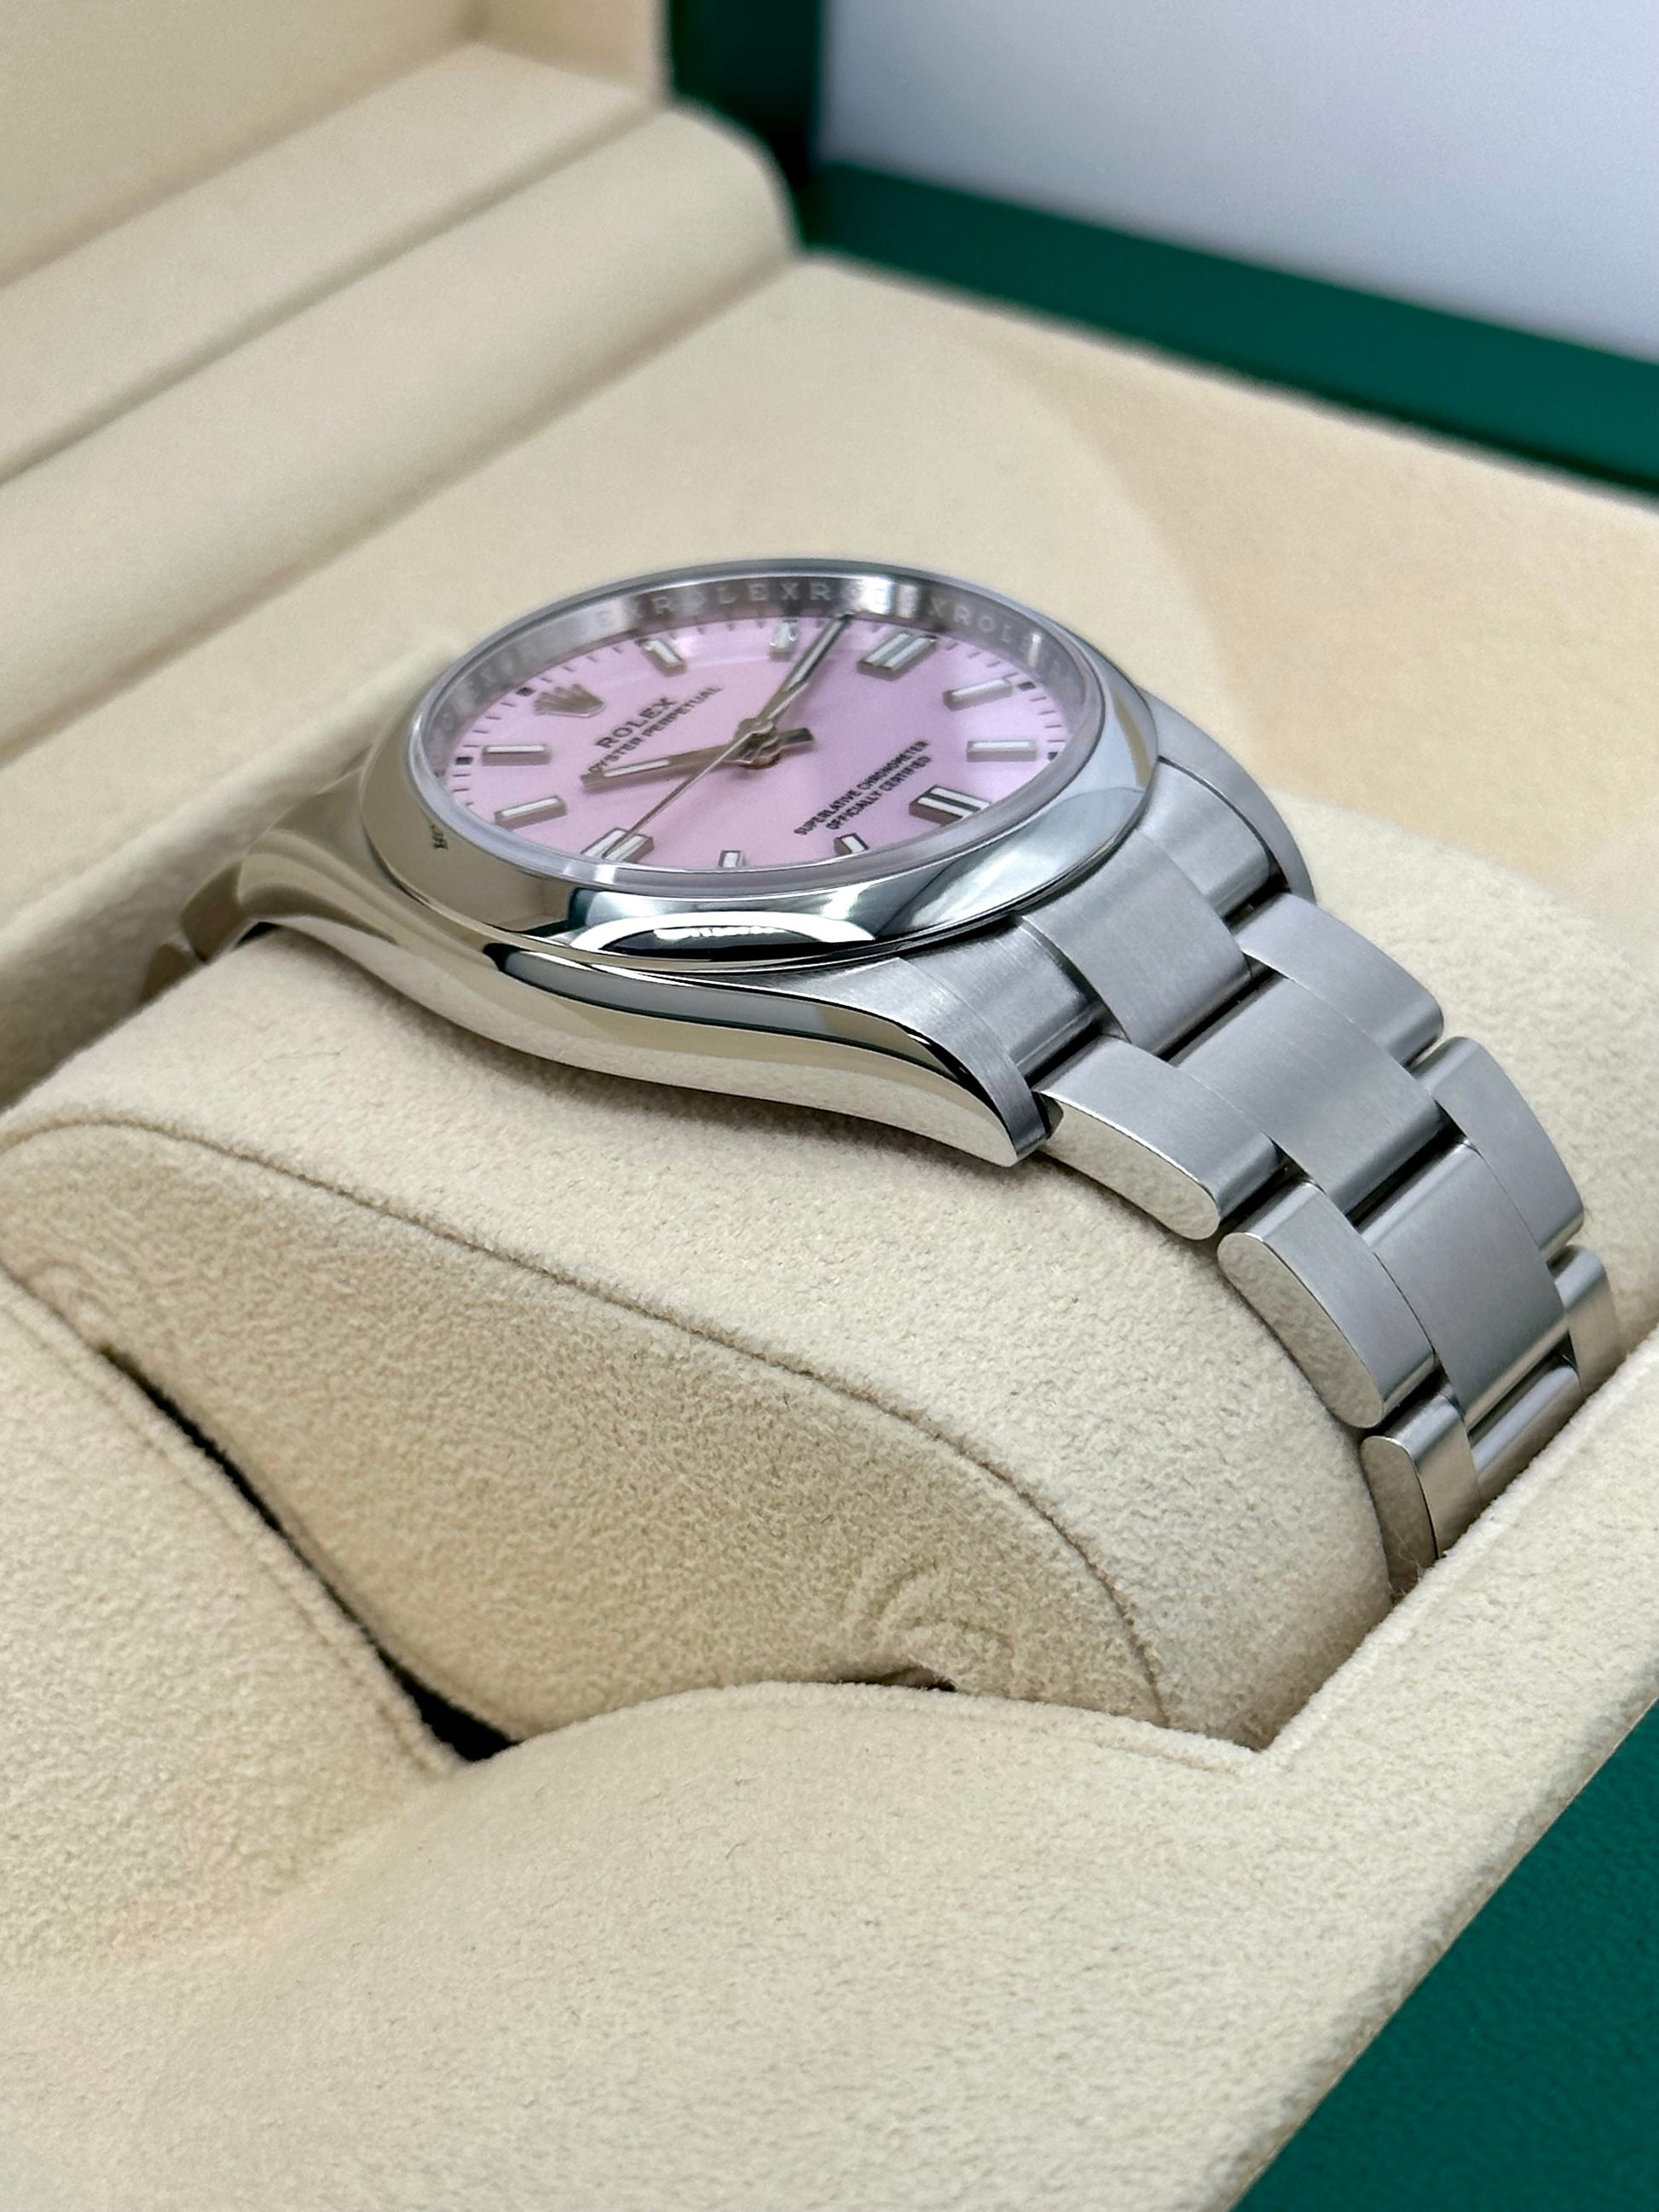 NEW 2023 Rolex Oyster Perpetual 36mm 126000 Candy Pink Stick Dial - MyWatchLLC